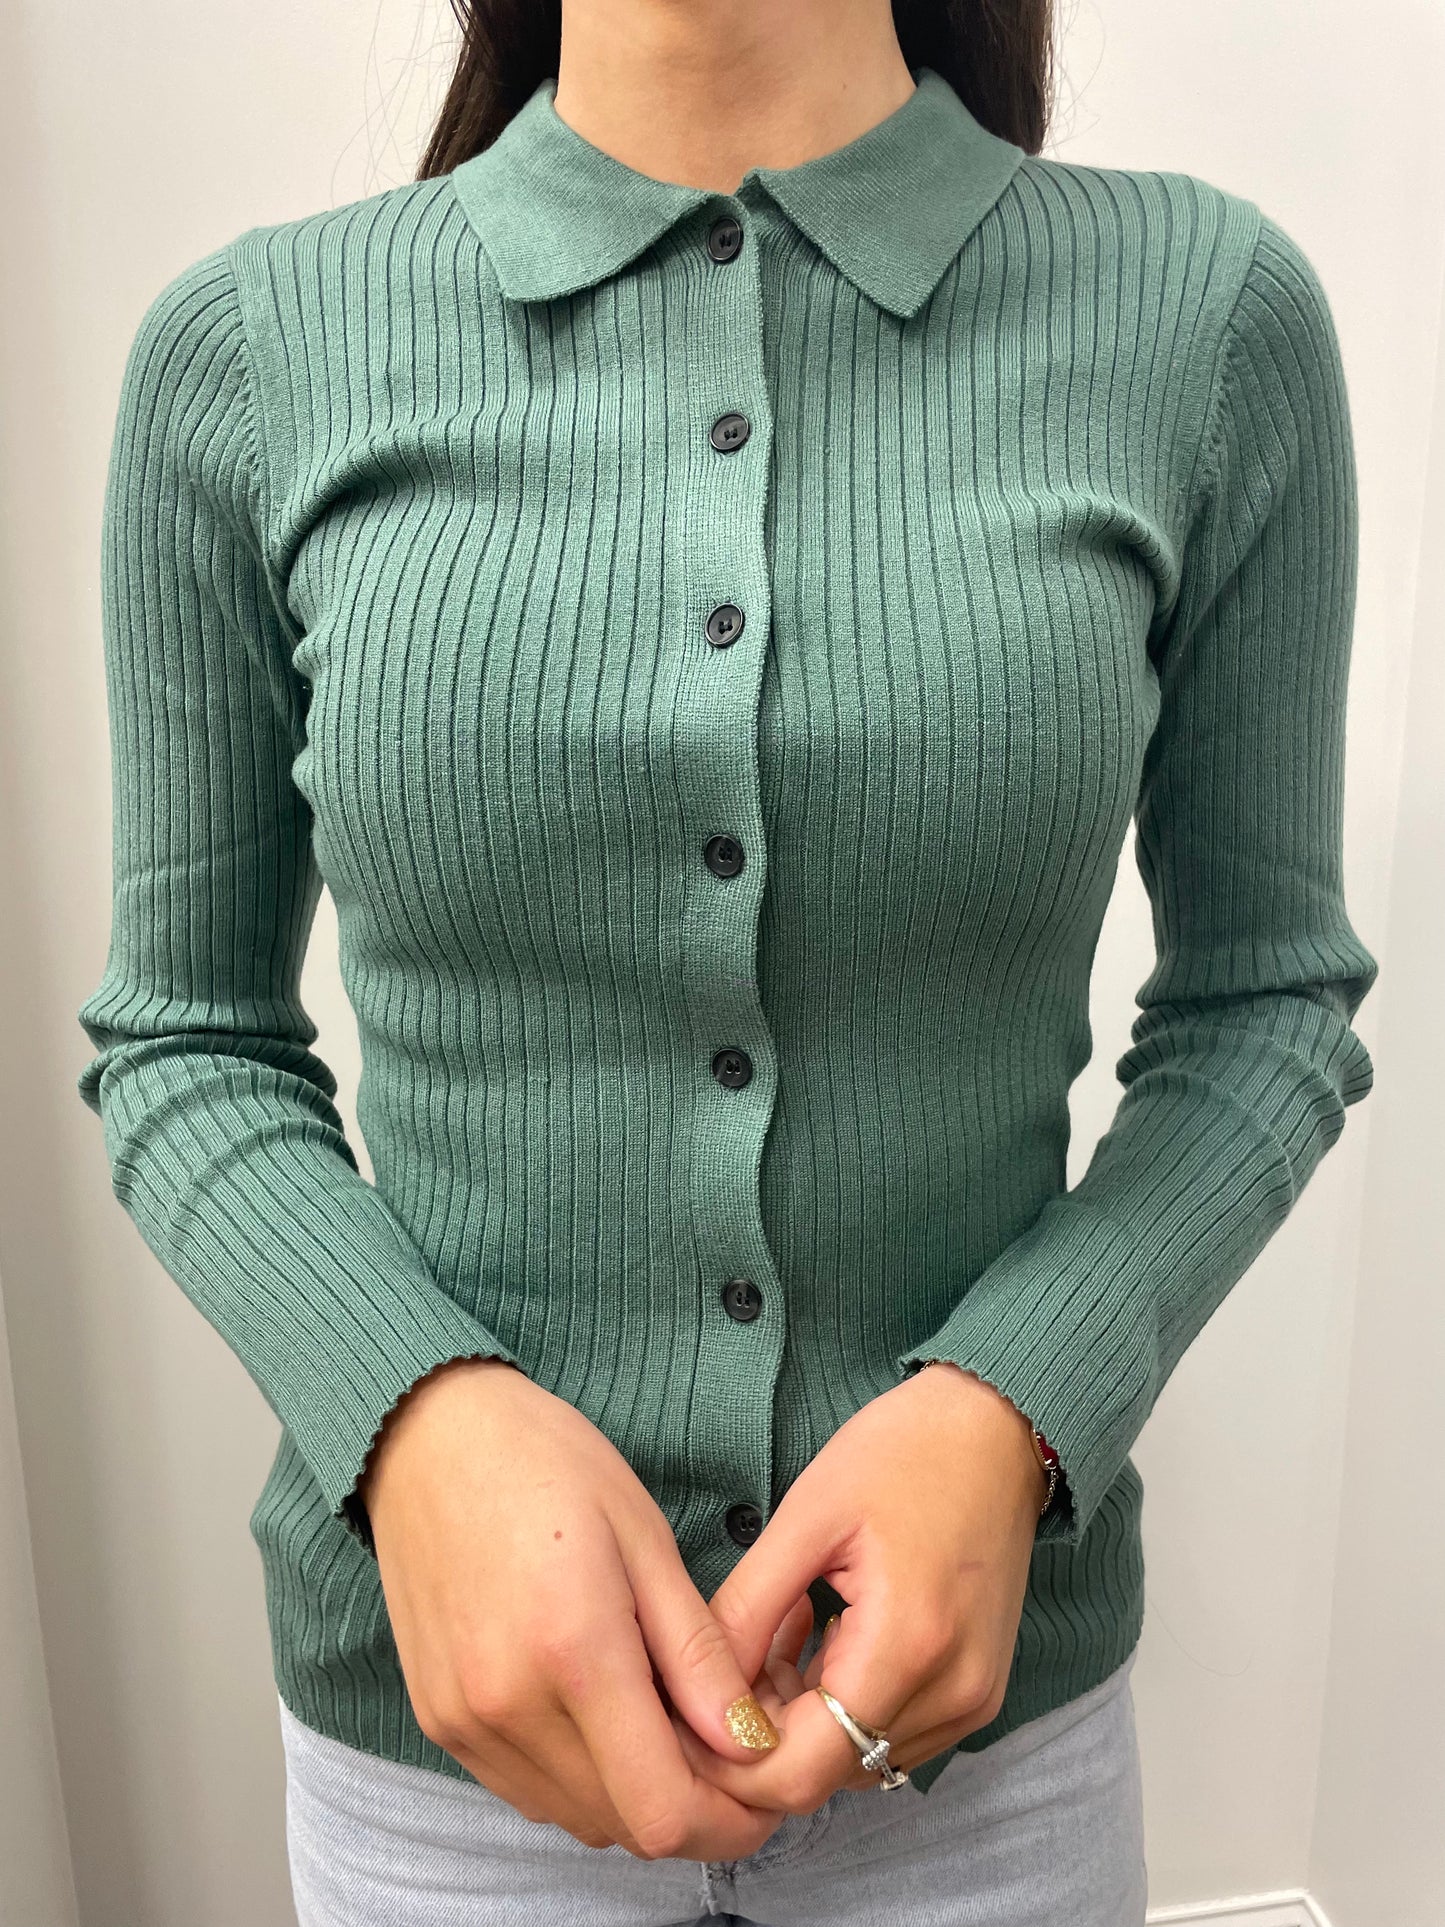 Cali Collared Fitted Cardigan  Collared Neckline Button Up Closure Colors:  Green Fitted Full Length 50% Rayon, 30% Polyester, 20% Nylon